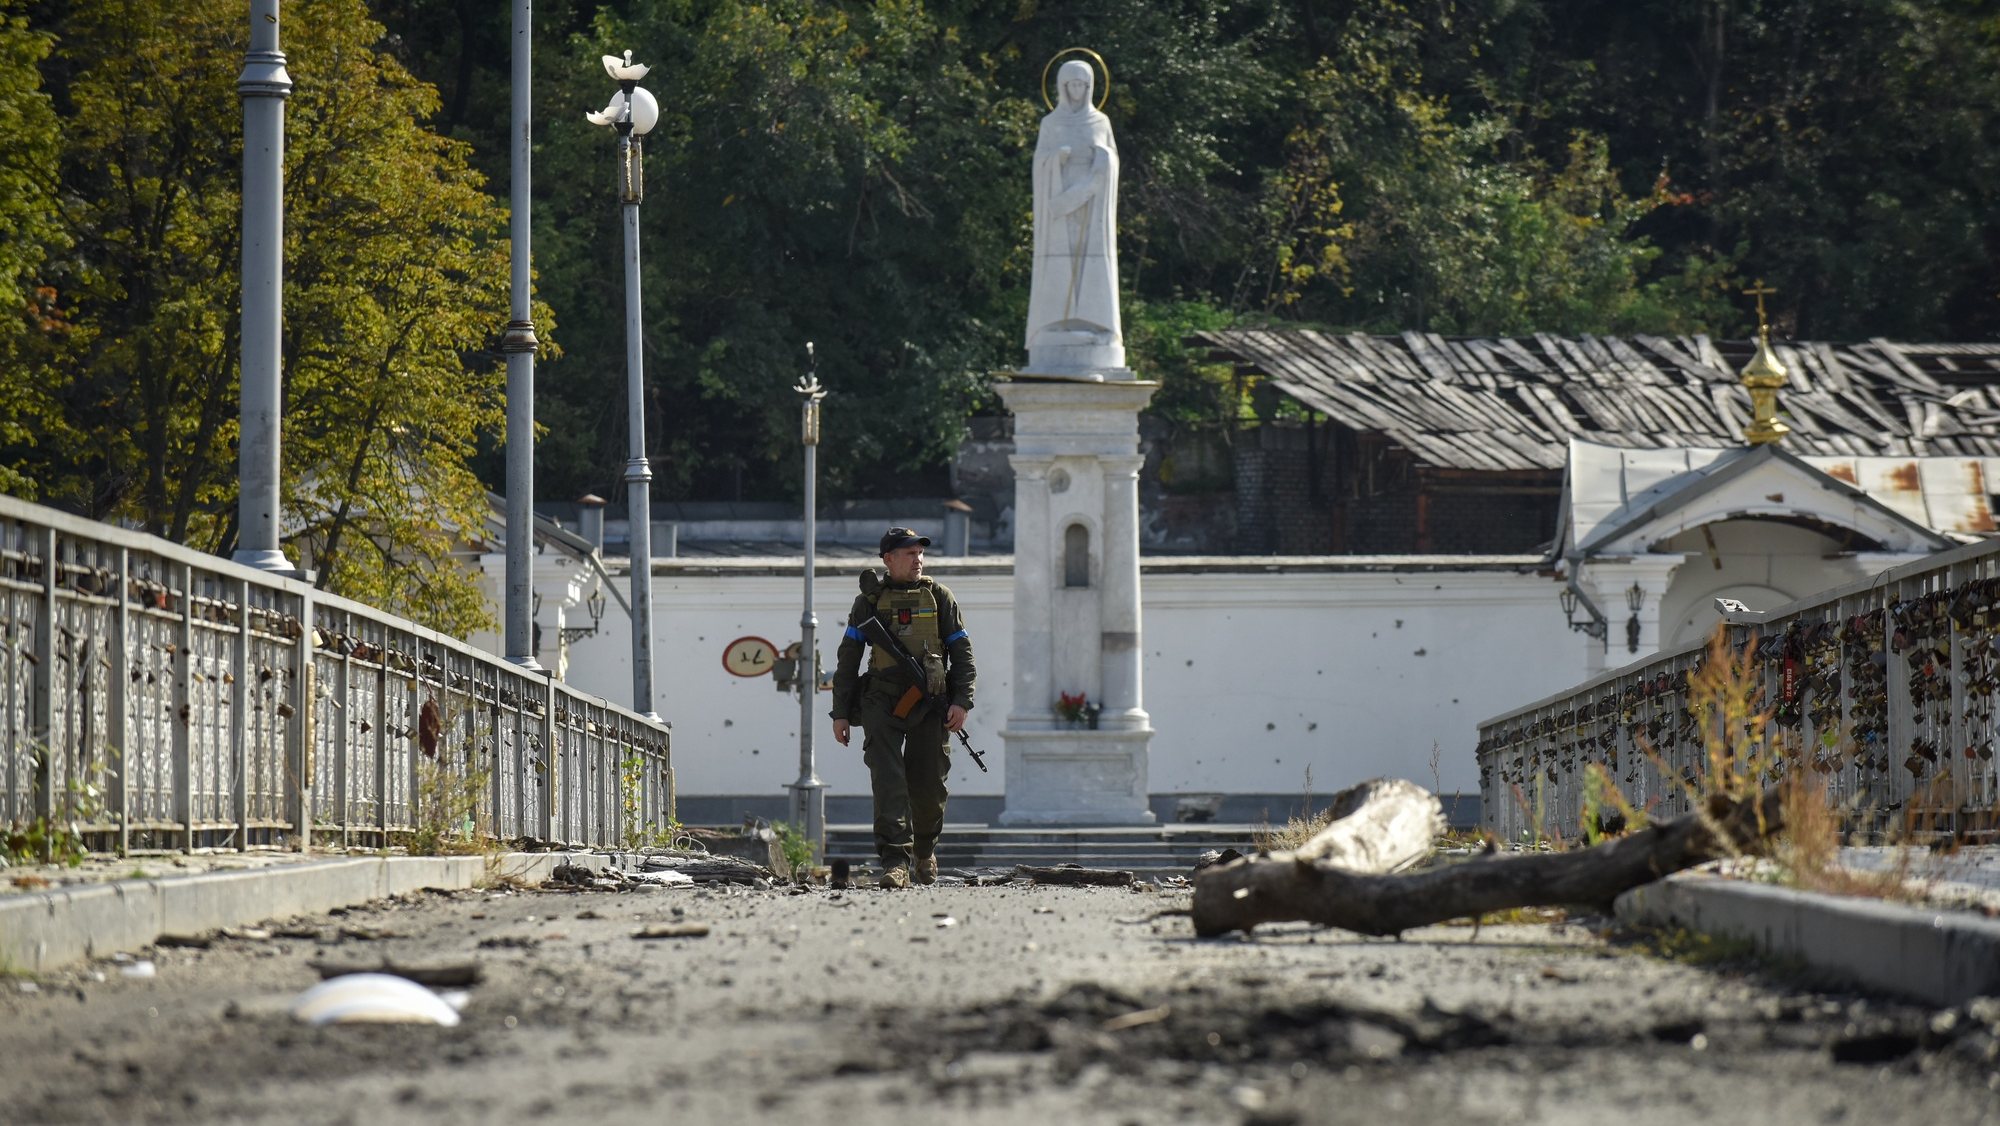 epa10218534 Pavlo, serviceman of Yuriy Kulchytsky battalion of National Guard of Ukraine, walks on damaged bridge near Holy Mountains Lavra of the Holy Dormition in Sviatohirsk town in Donetsk region, Ukraine, 01 October 2022. The Ukrainian army pushed Russian troops from occupied territory in the northeast of the country in a counterattack. Kharkiv and surrounding areas have been the target of heavy shelling since February 2022, when Russian troops entered Ukraine starting a conflict that has provoked destruction and a humanitarian crisis.  EPA/OLEG PETRASYUK